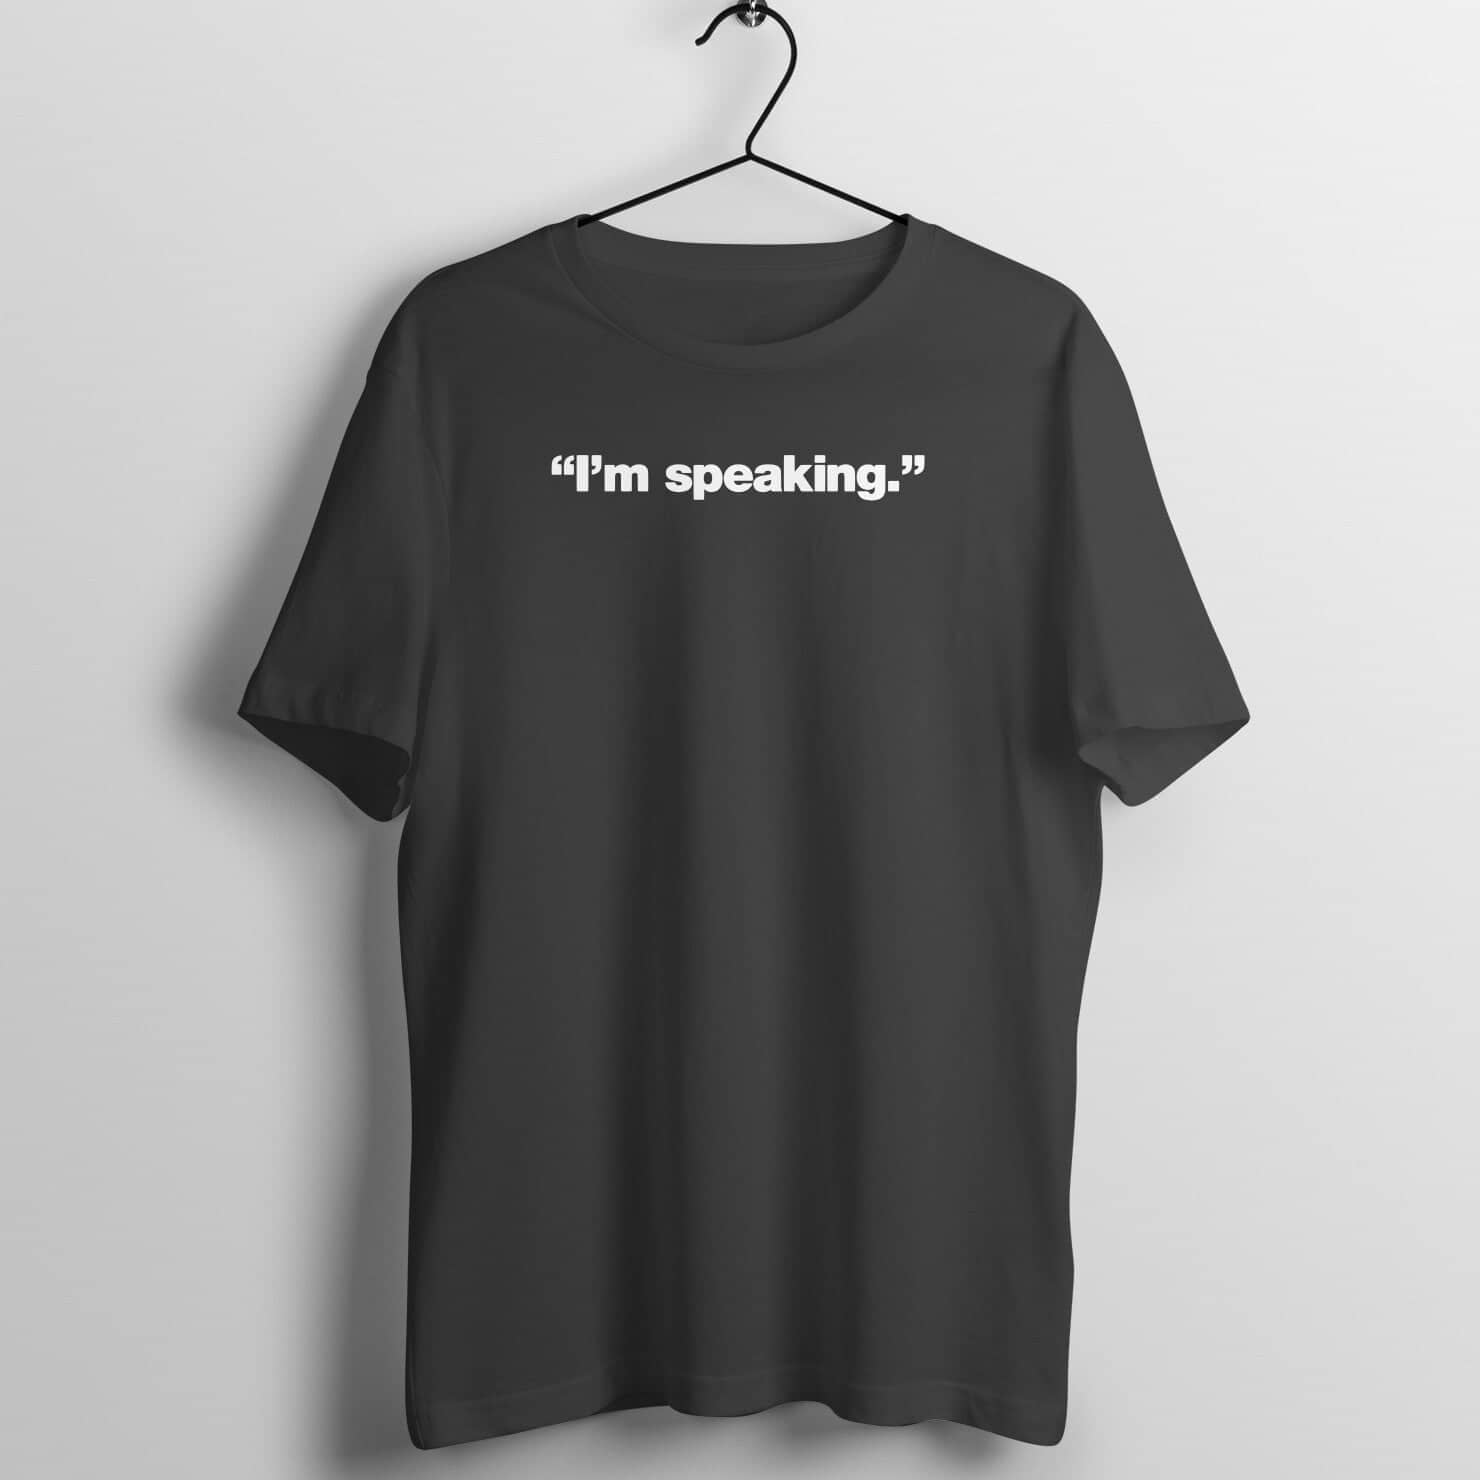 I'm Speaking Funny Black T Shirt for Men and Women Shirts & Tops Printrove Black S 